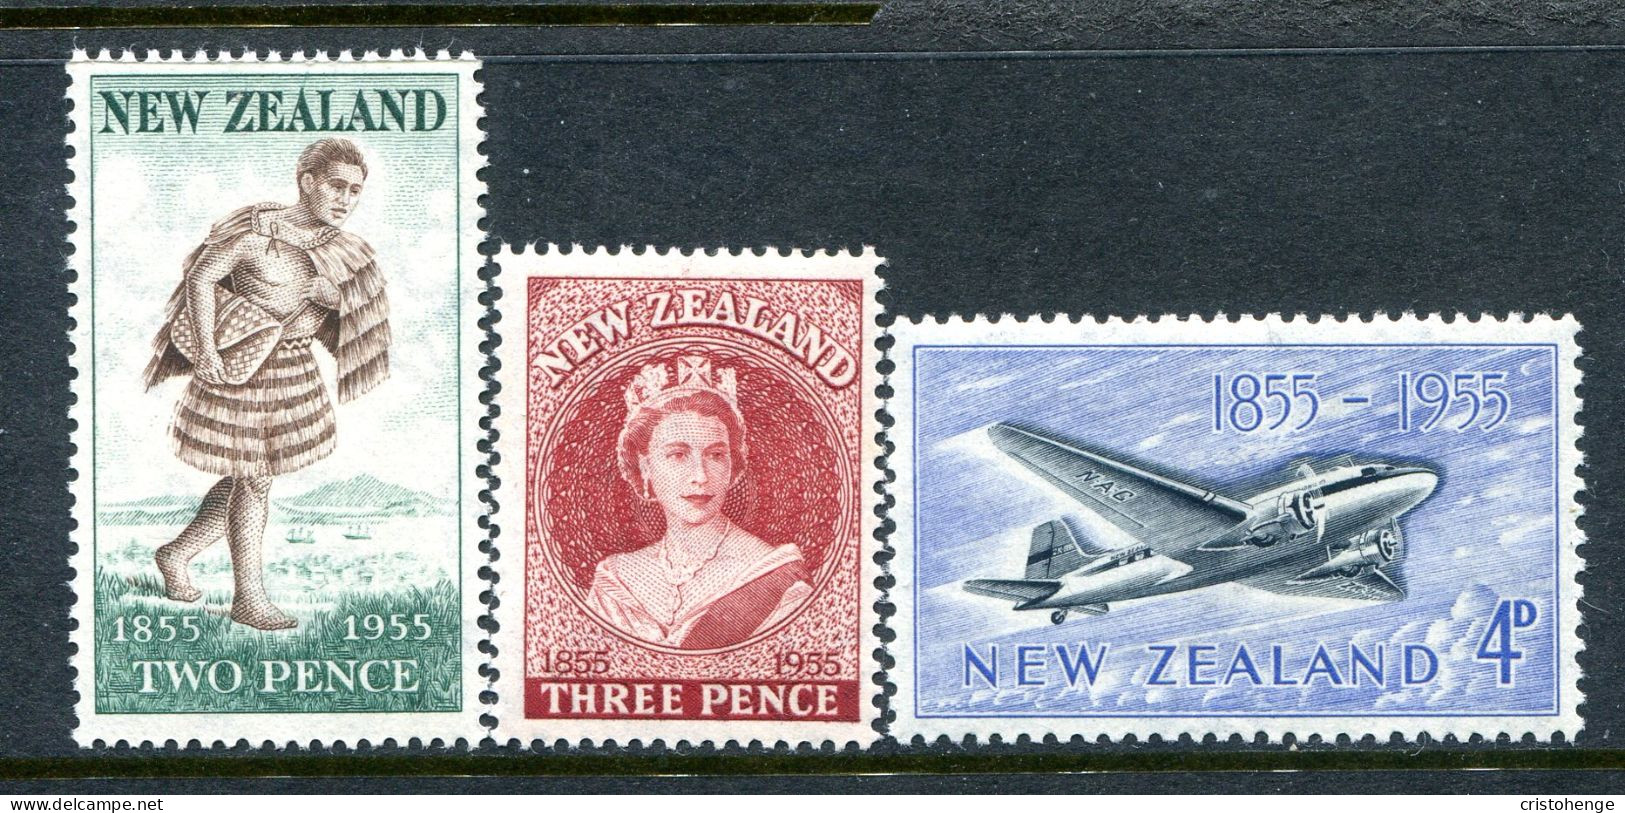 New Zealand 1955 Centenary Of First New Zealand Postage Stamps Set HM (SG 739-741) - Nuevos